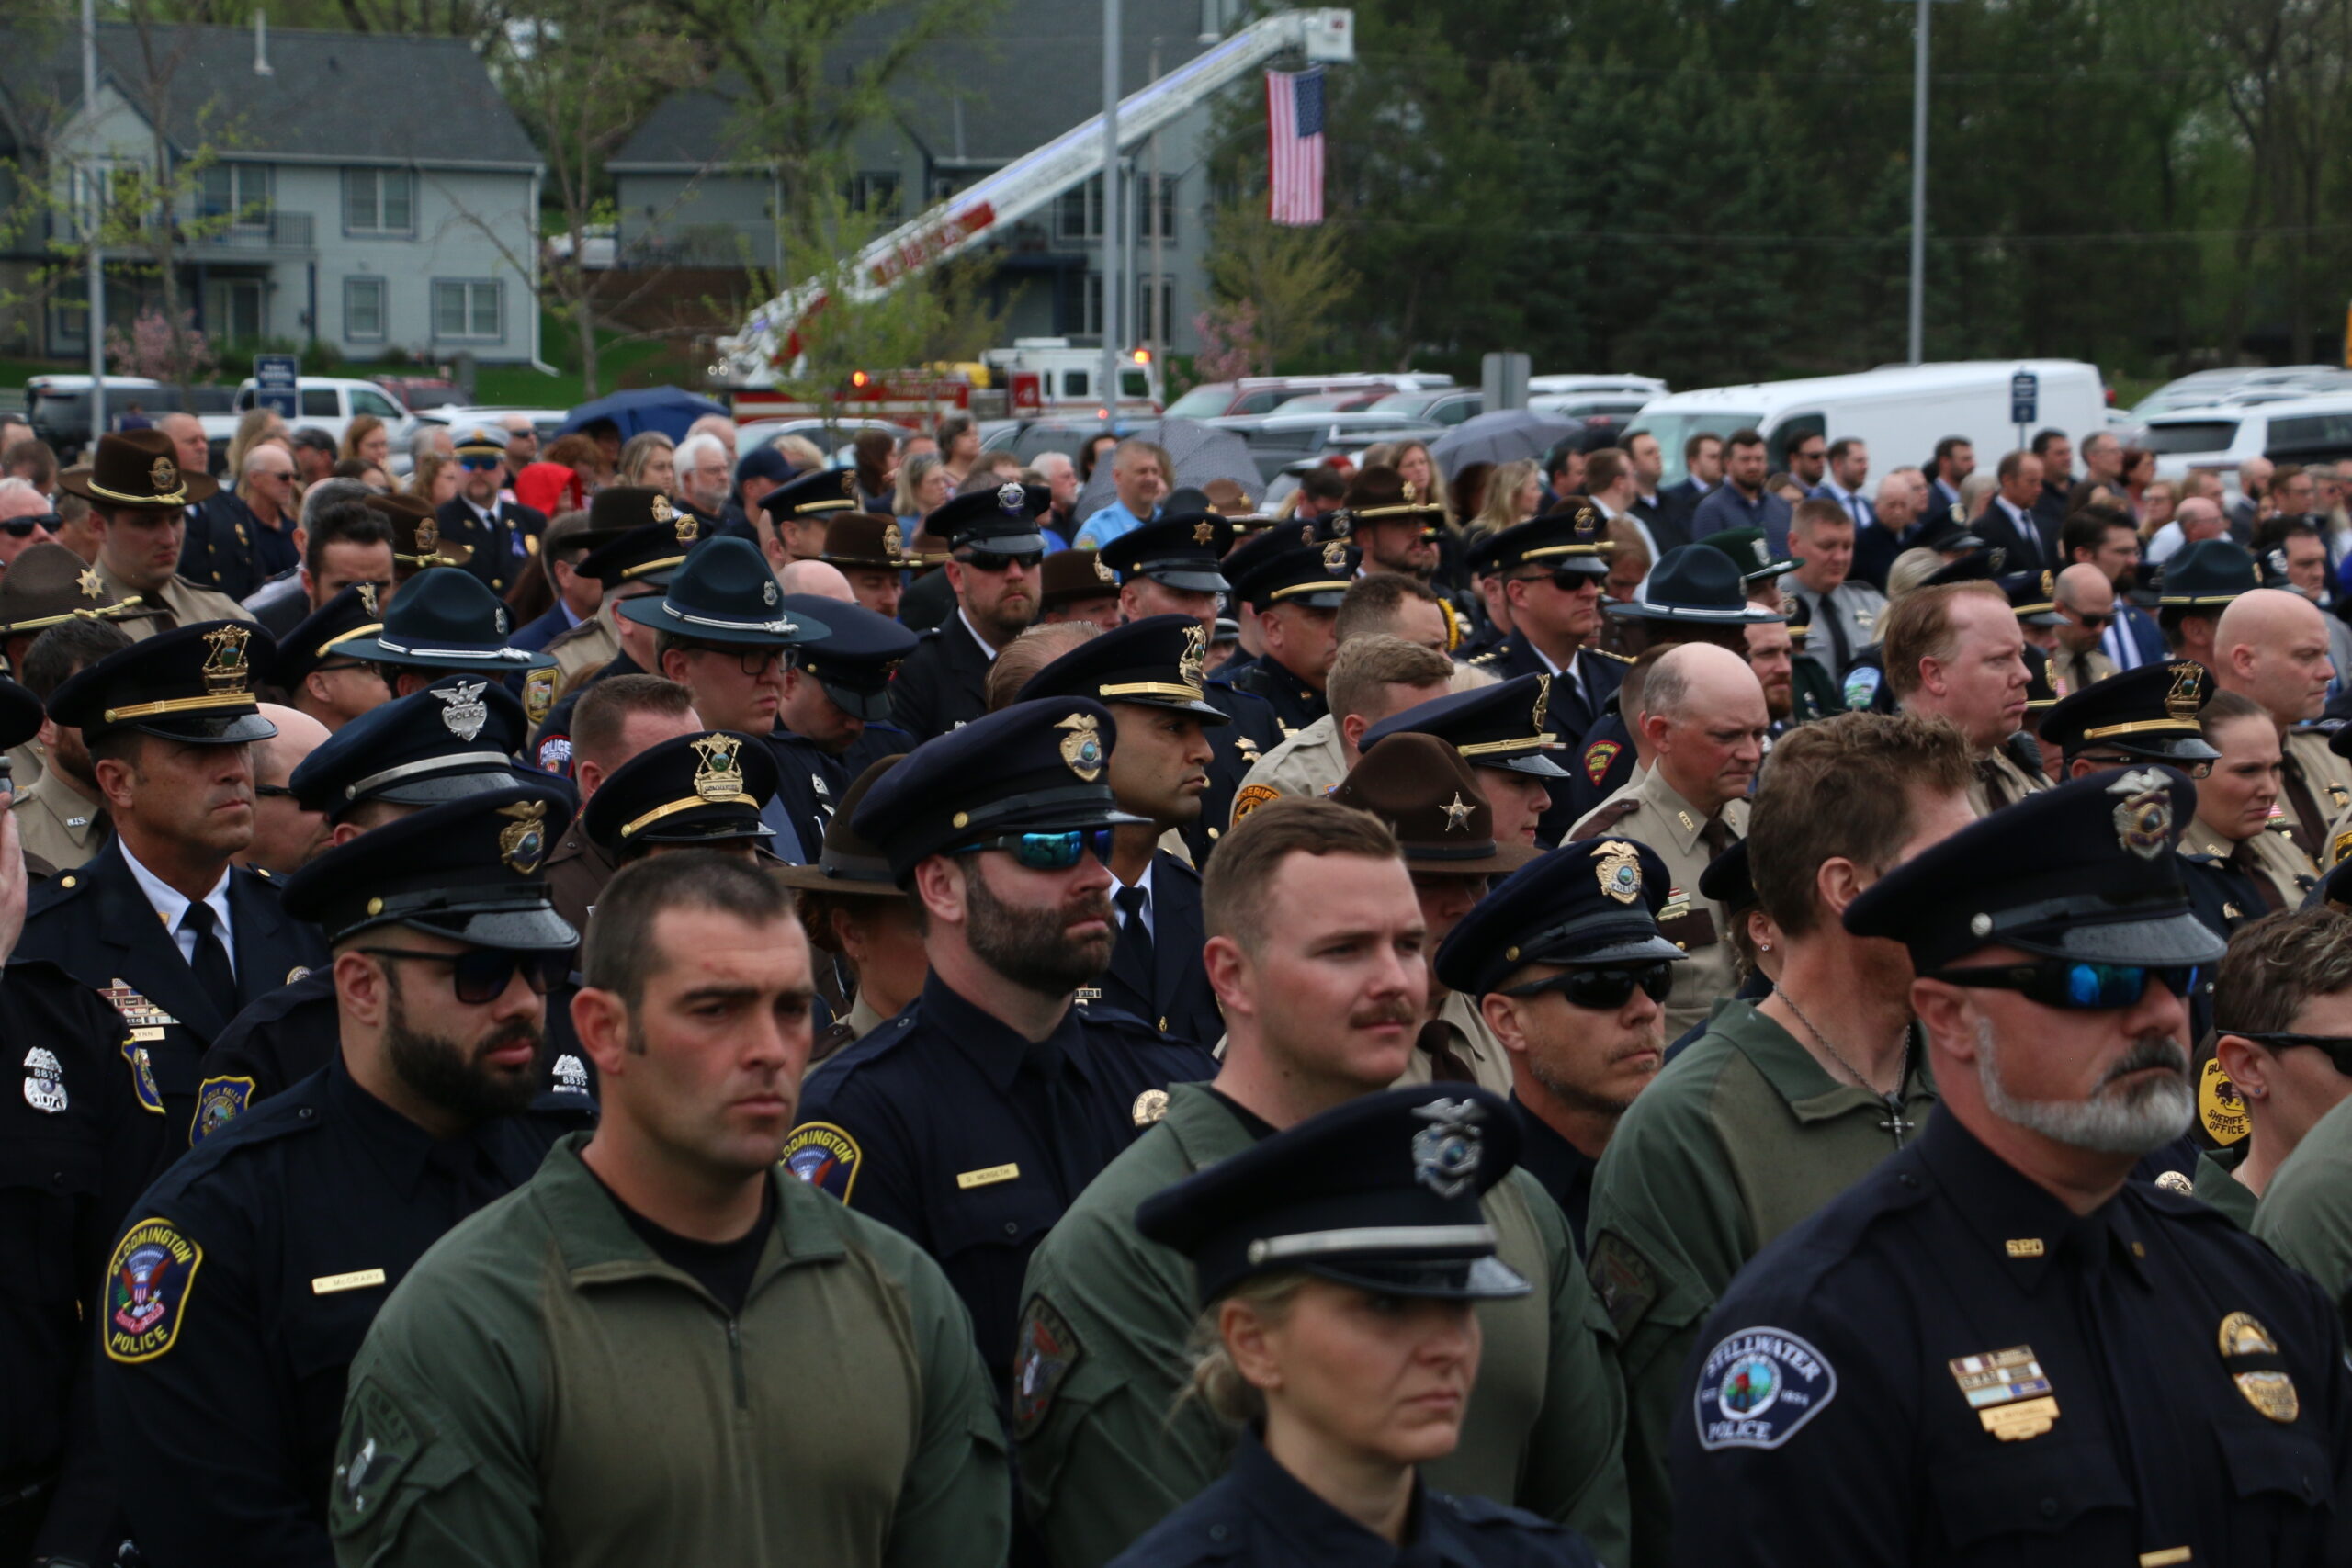 Members of law enforcement look on during funeral honors for St. Croix County Sheriff's Deputy Kaitie Leising, who was killed in the line of duty.